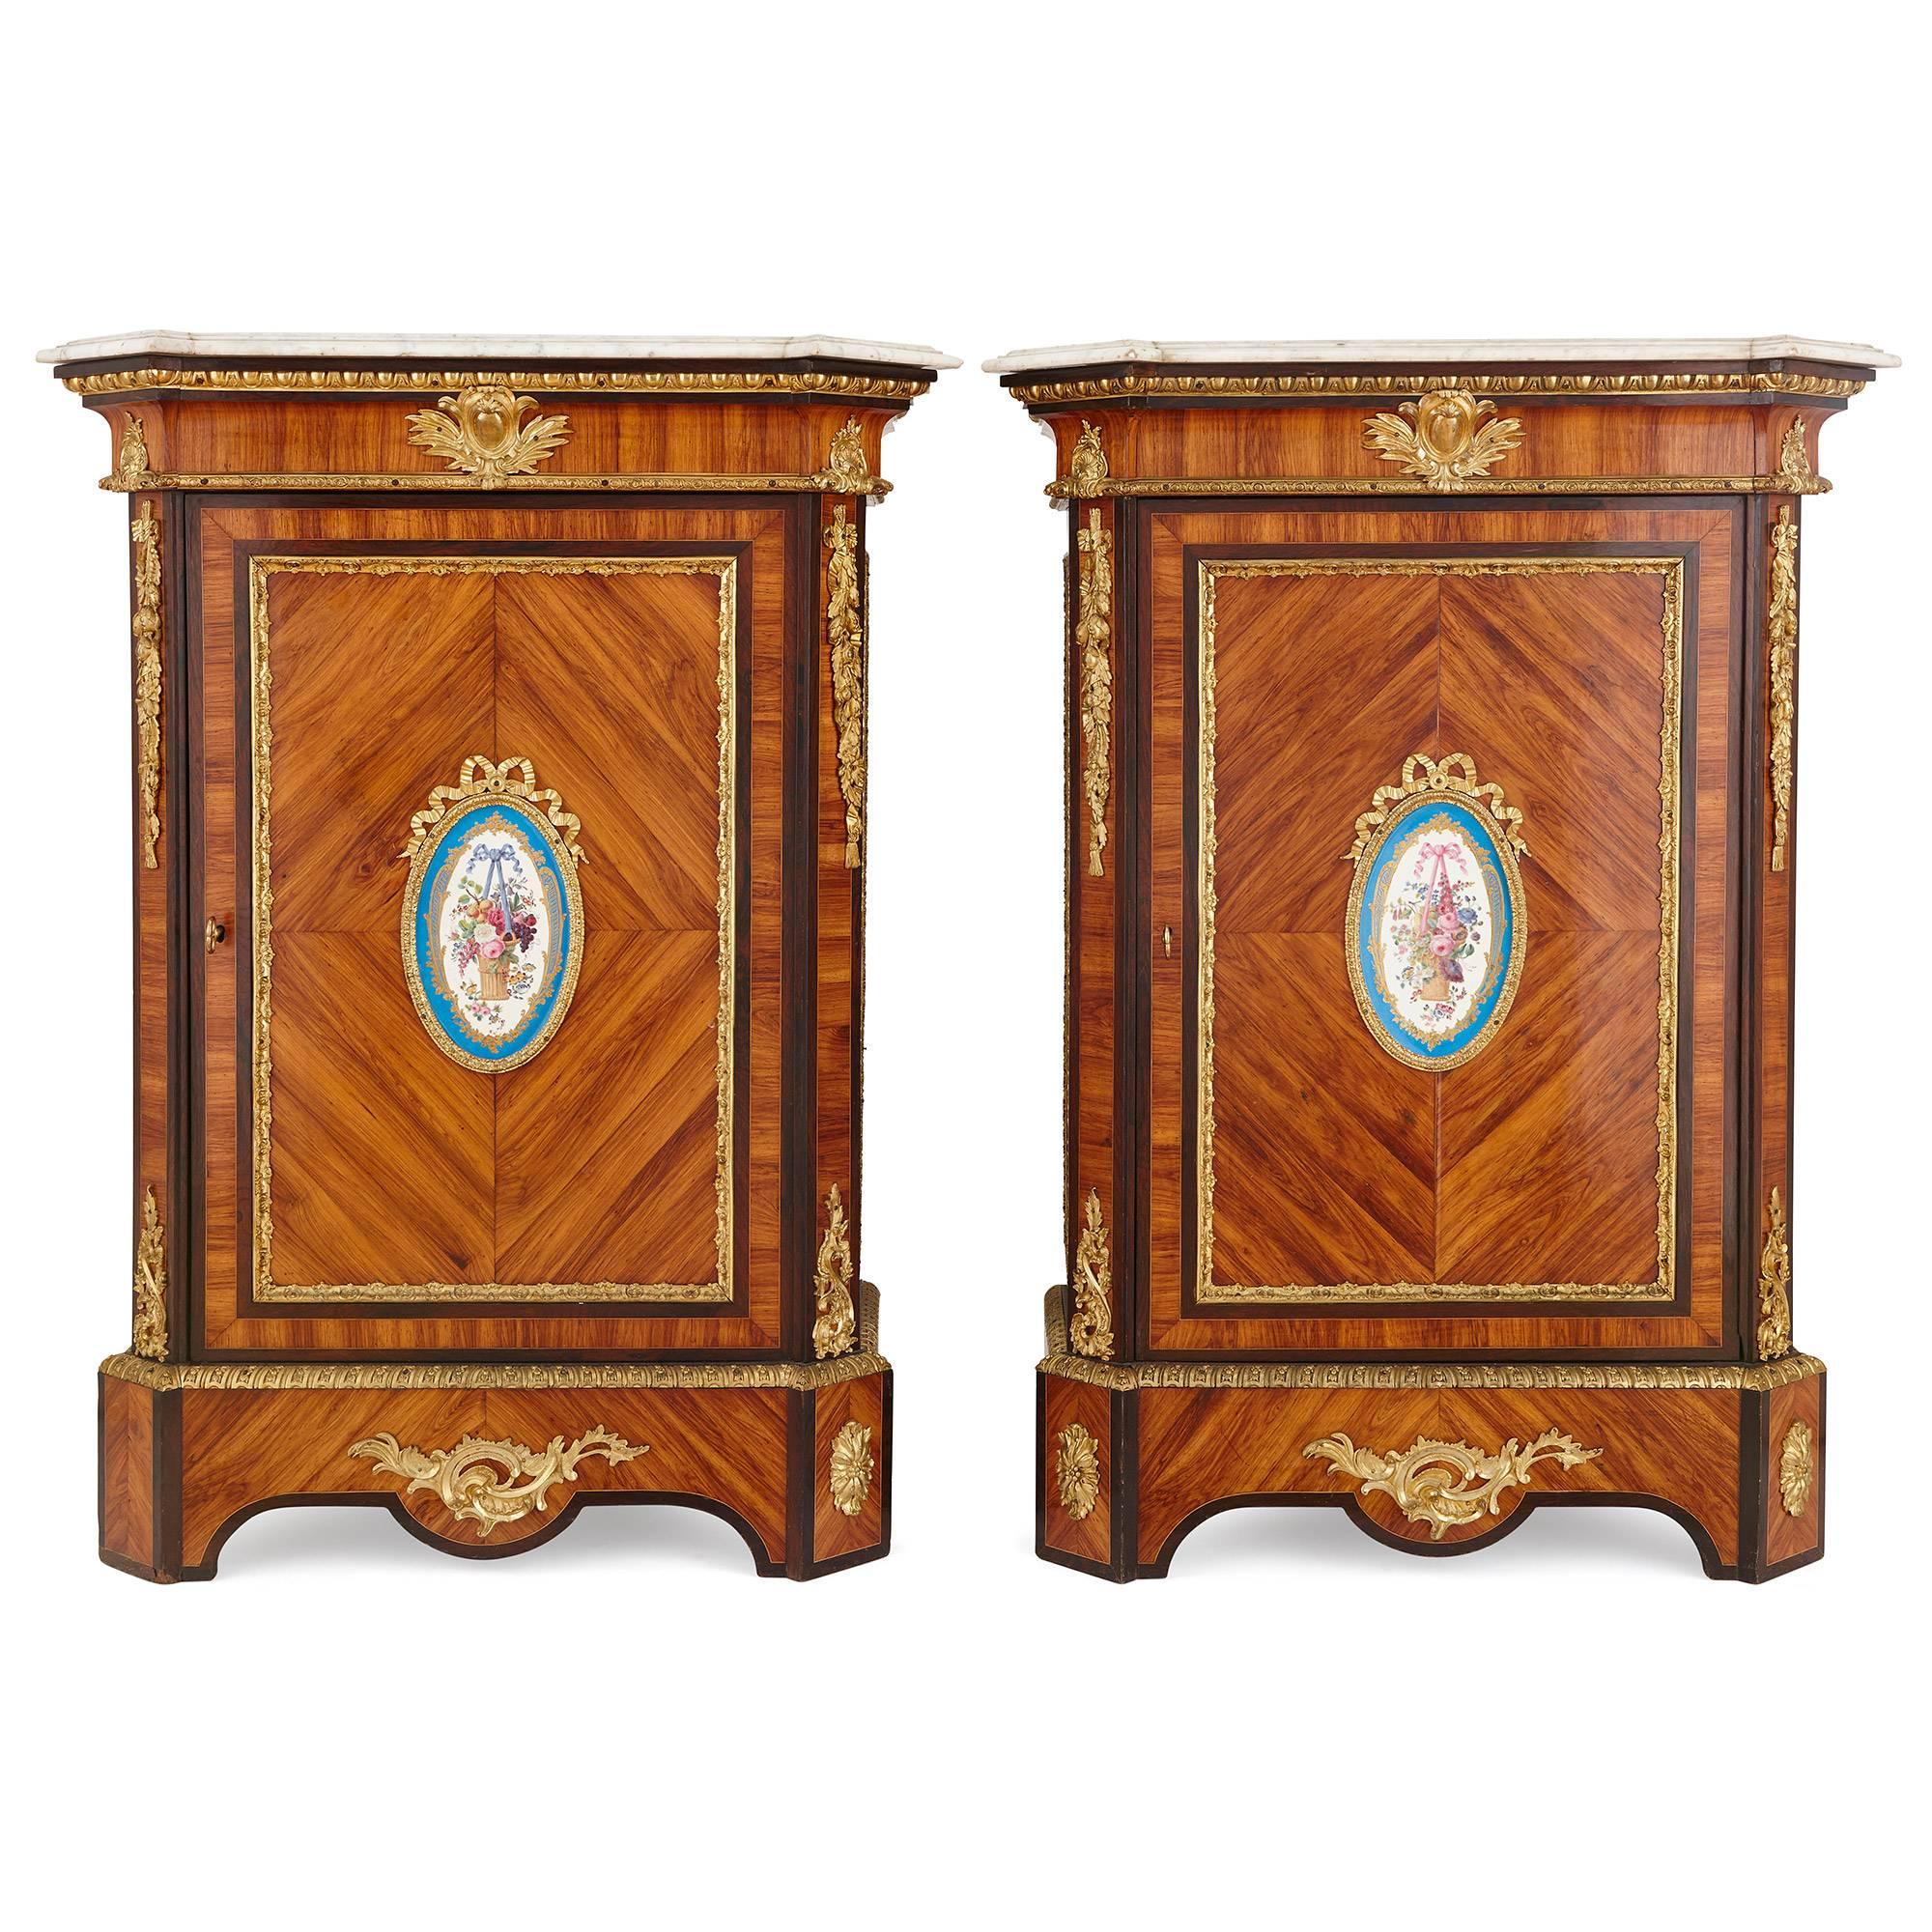 It is the refined simplicity and elegance of these antique French cabinets which makes them so special. Dating from the late 19th century, these cabinets have been finely crafted using the most exquisite materials: rosewood and tulipwood for the